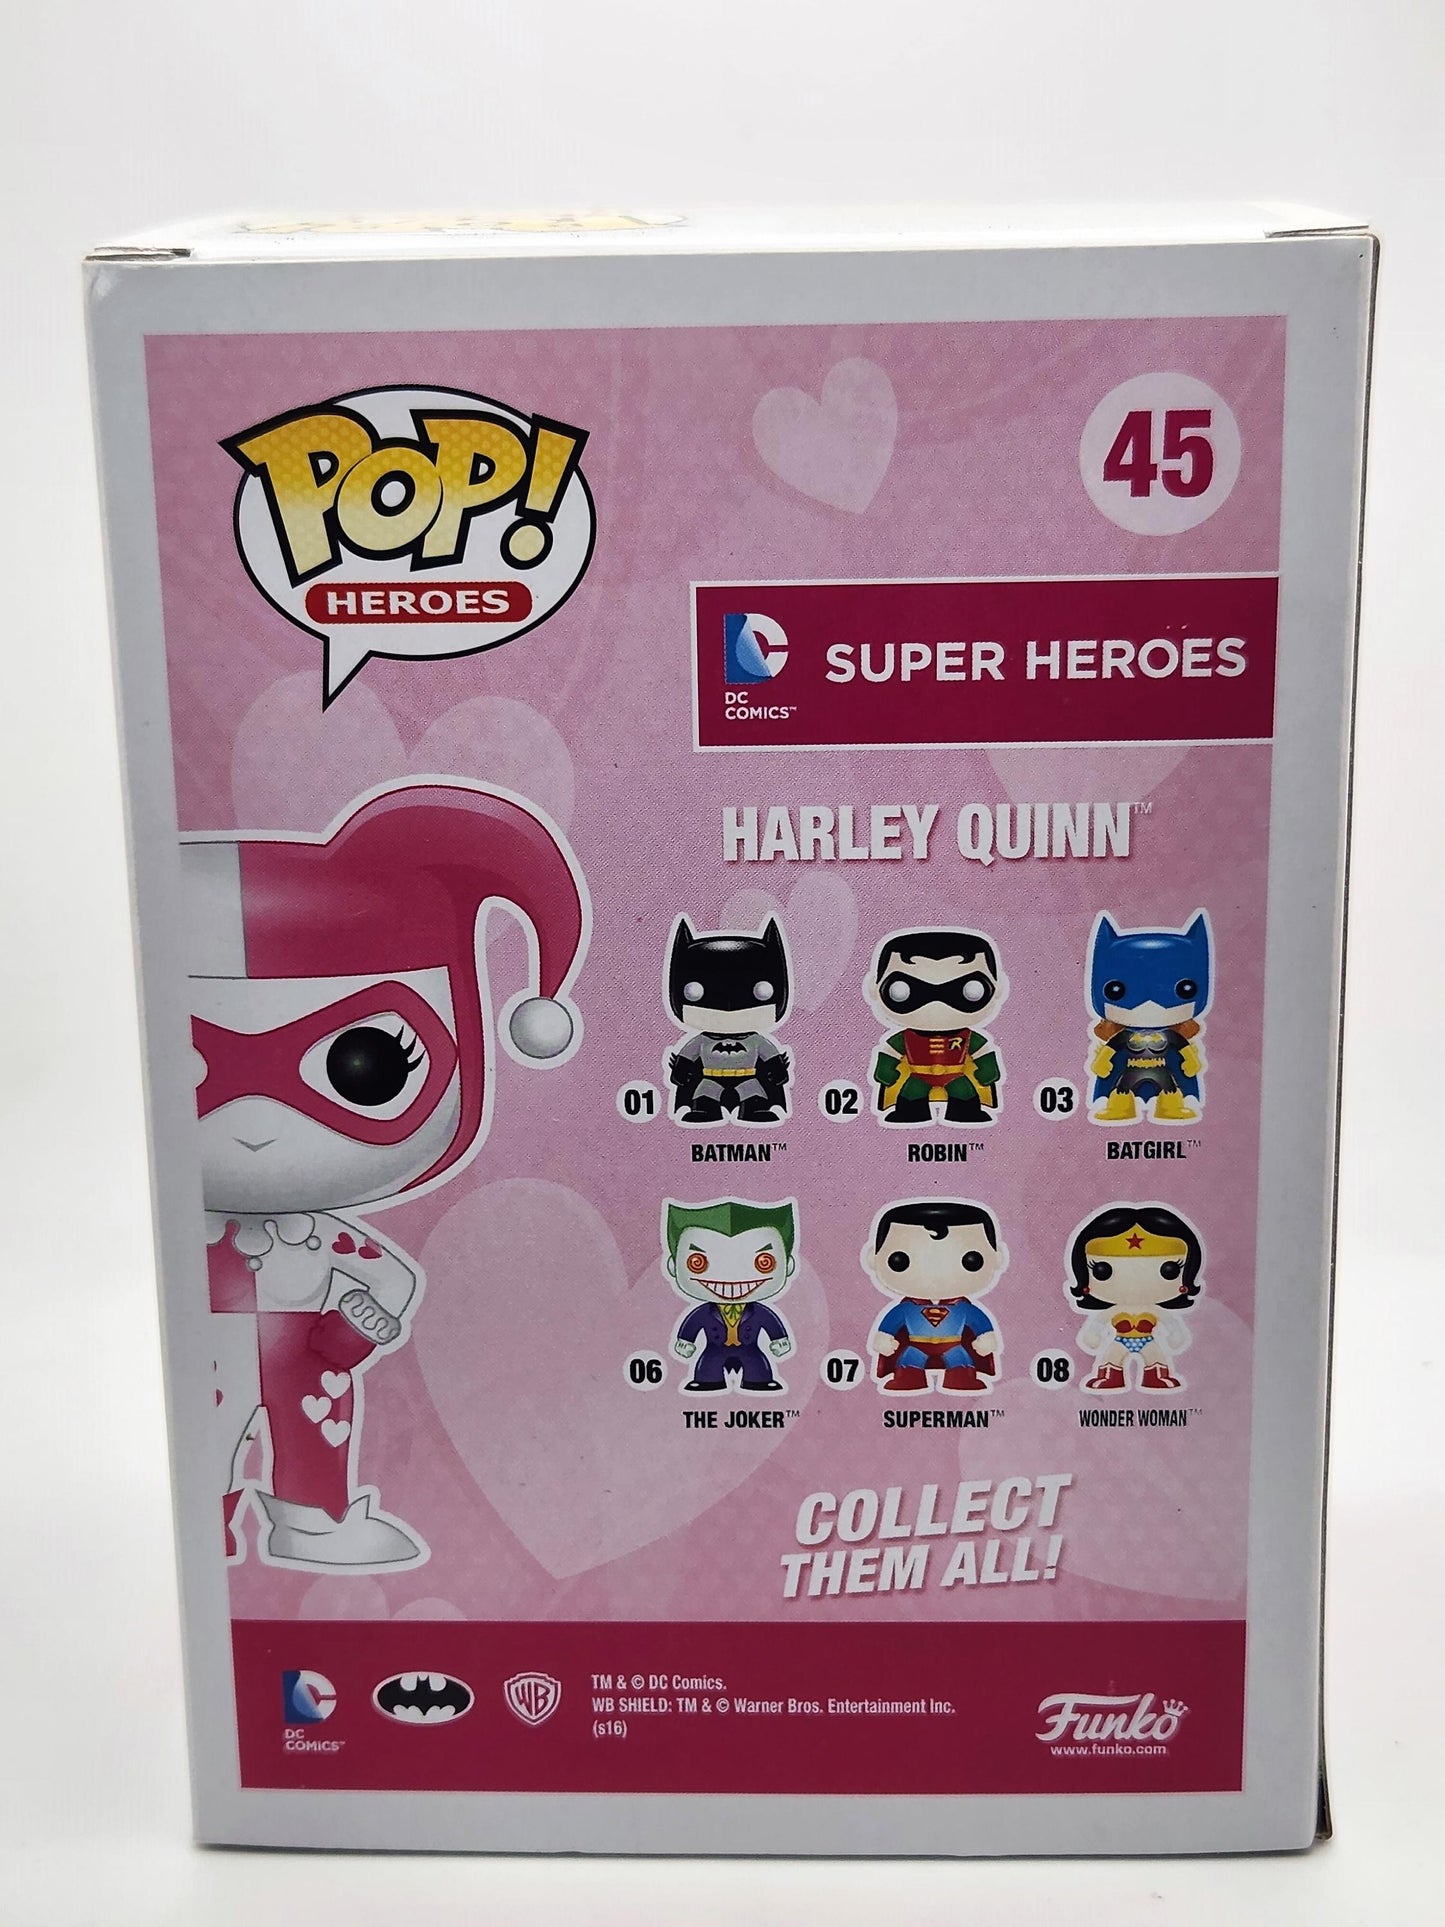 Harley Quinn (Breast Cancer Awareness) - #45 - Condition 9/10